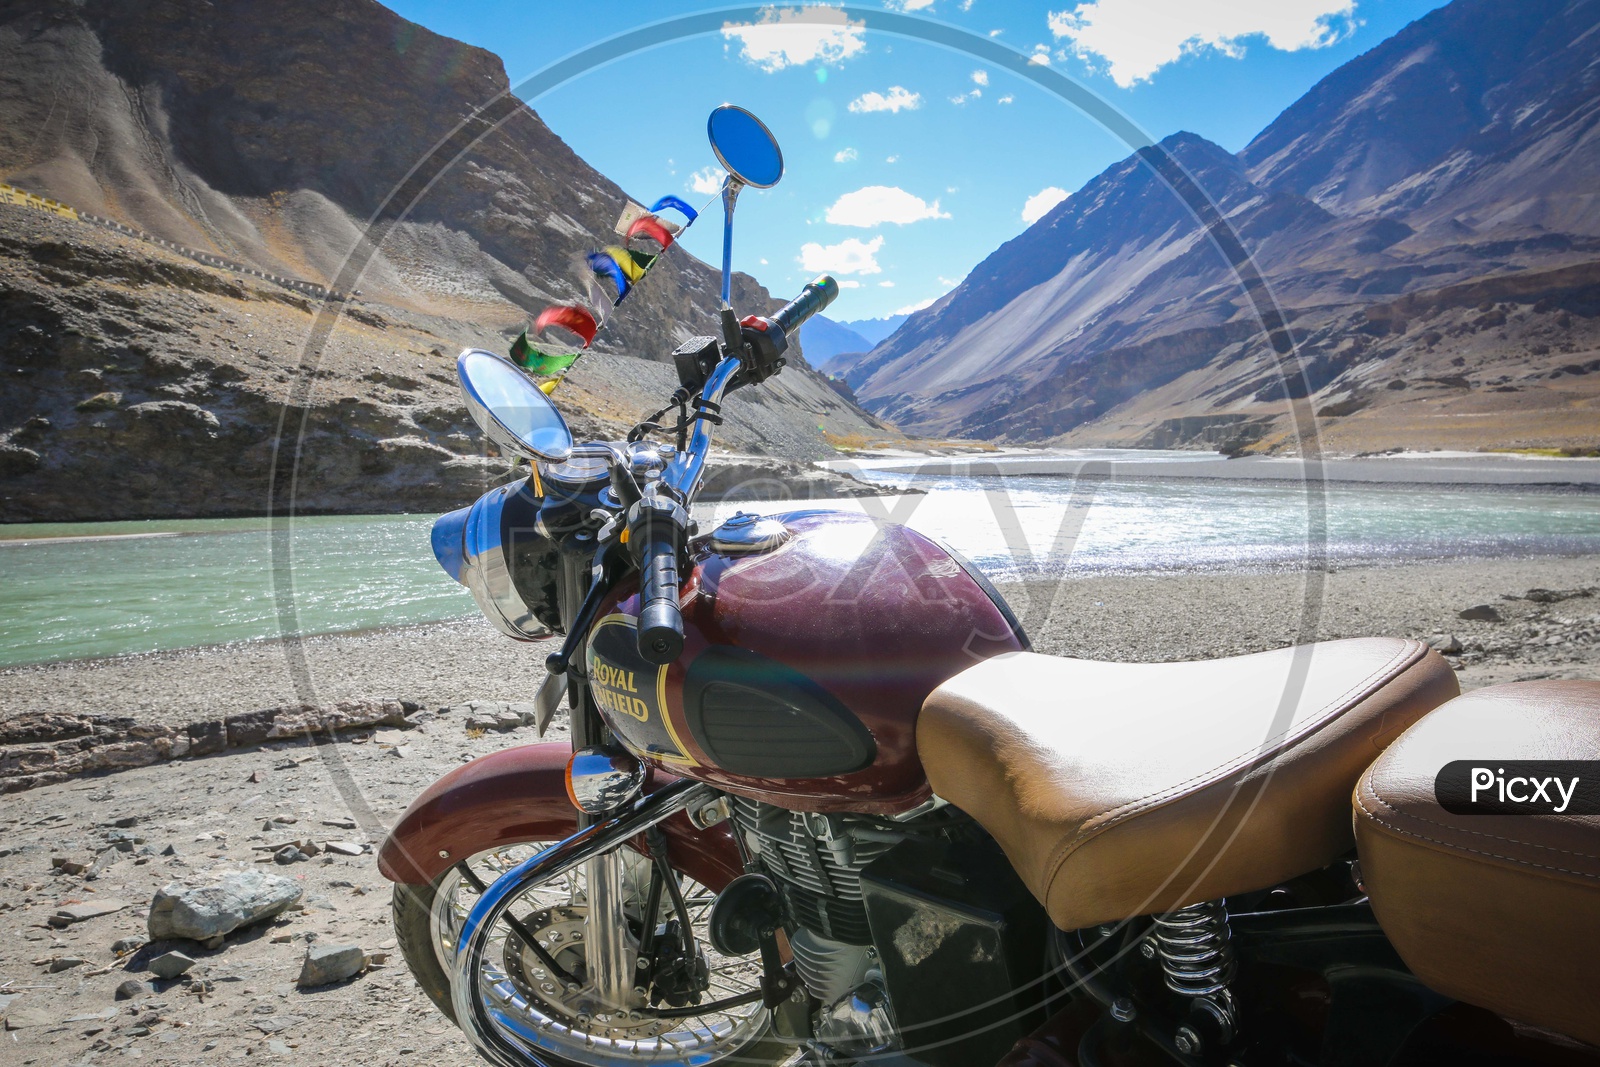 Royal Enfield Motorcycle by the Indus River